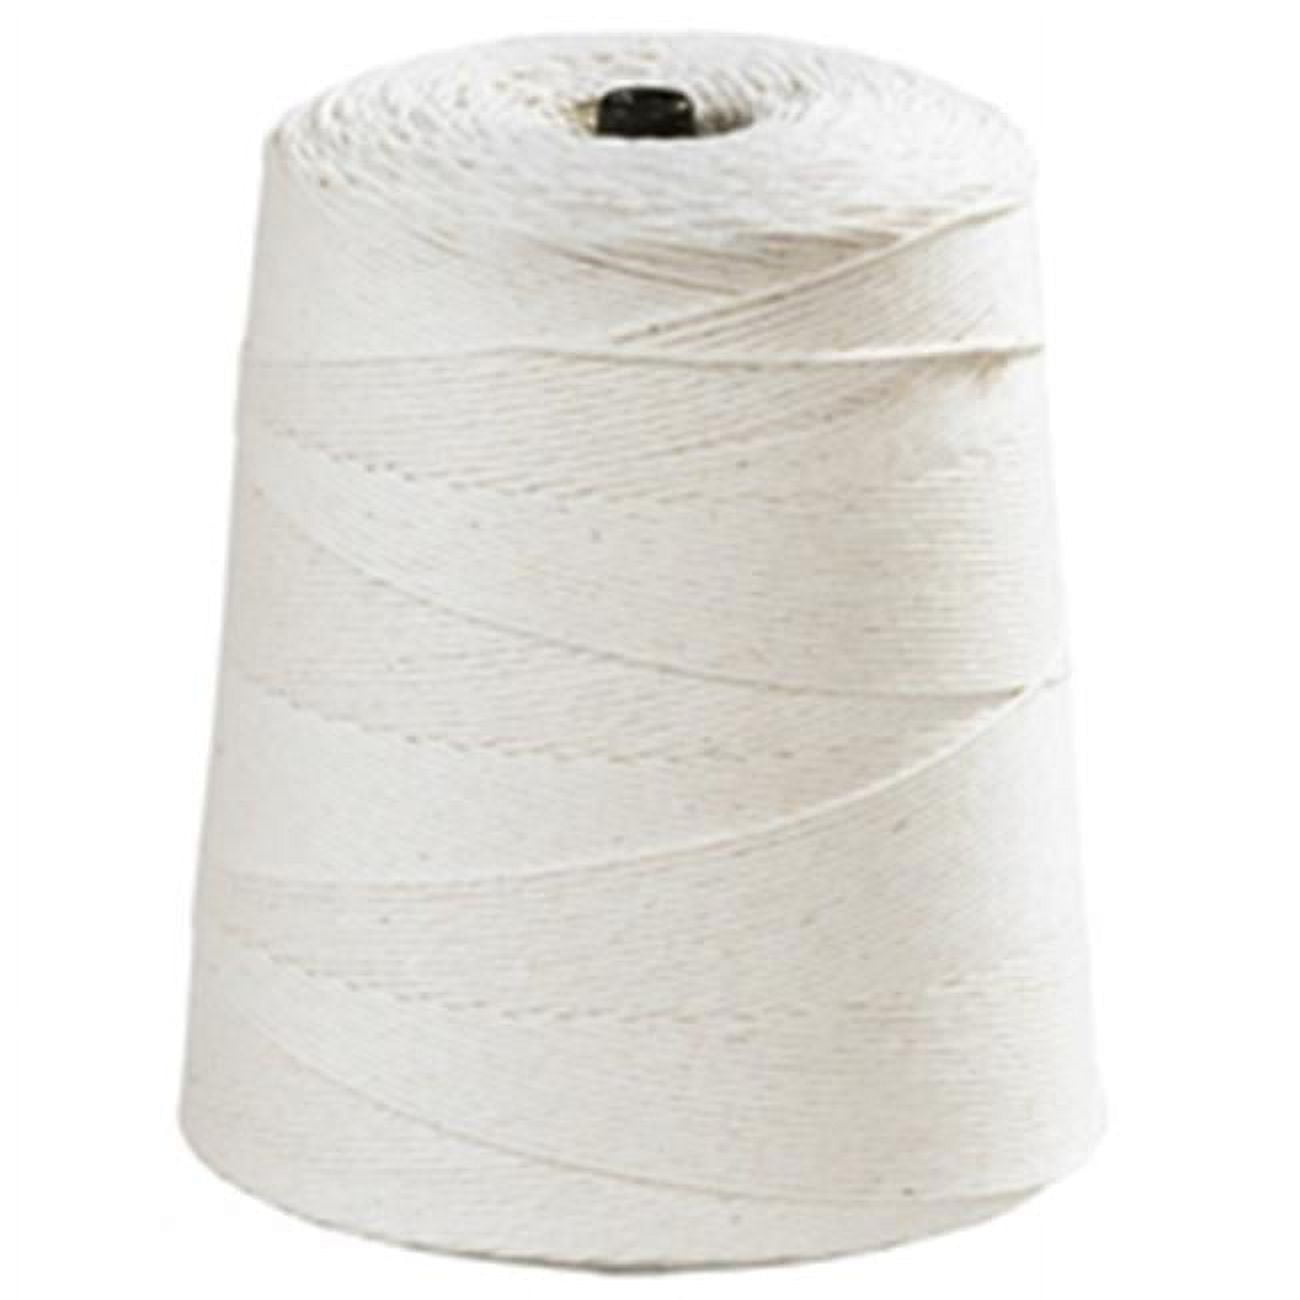 Picture of Box Partners TWC310 16-Ply 40 lbs Cotton Twine, White